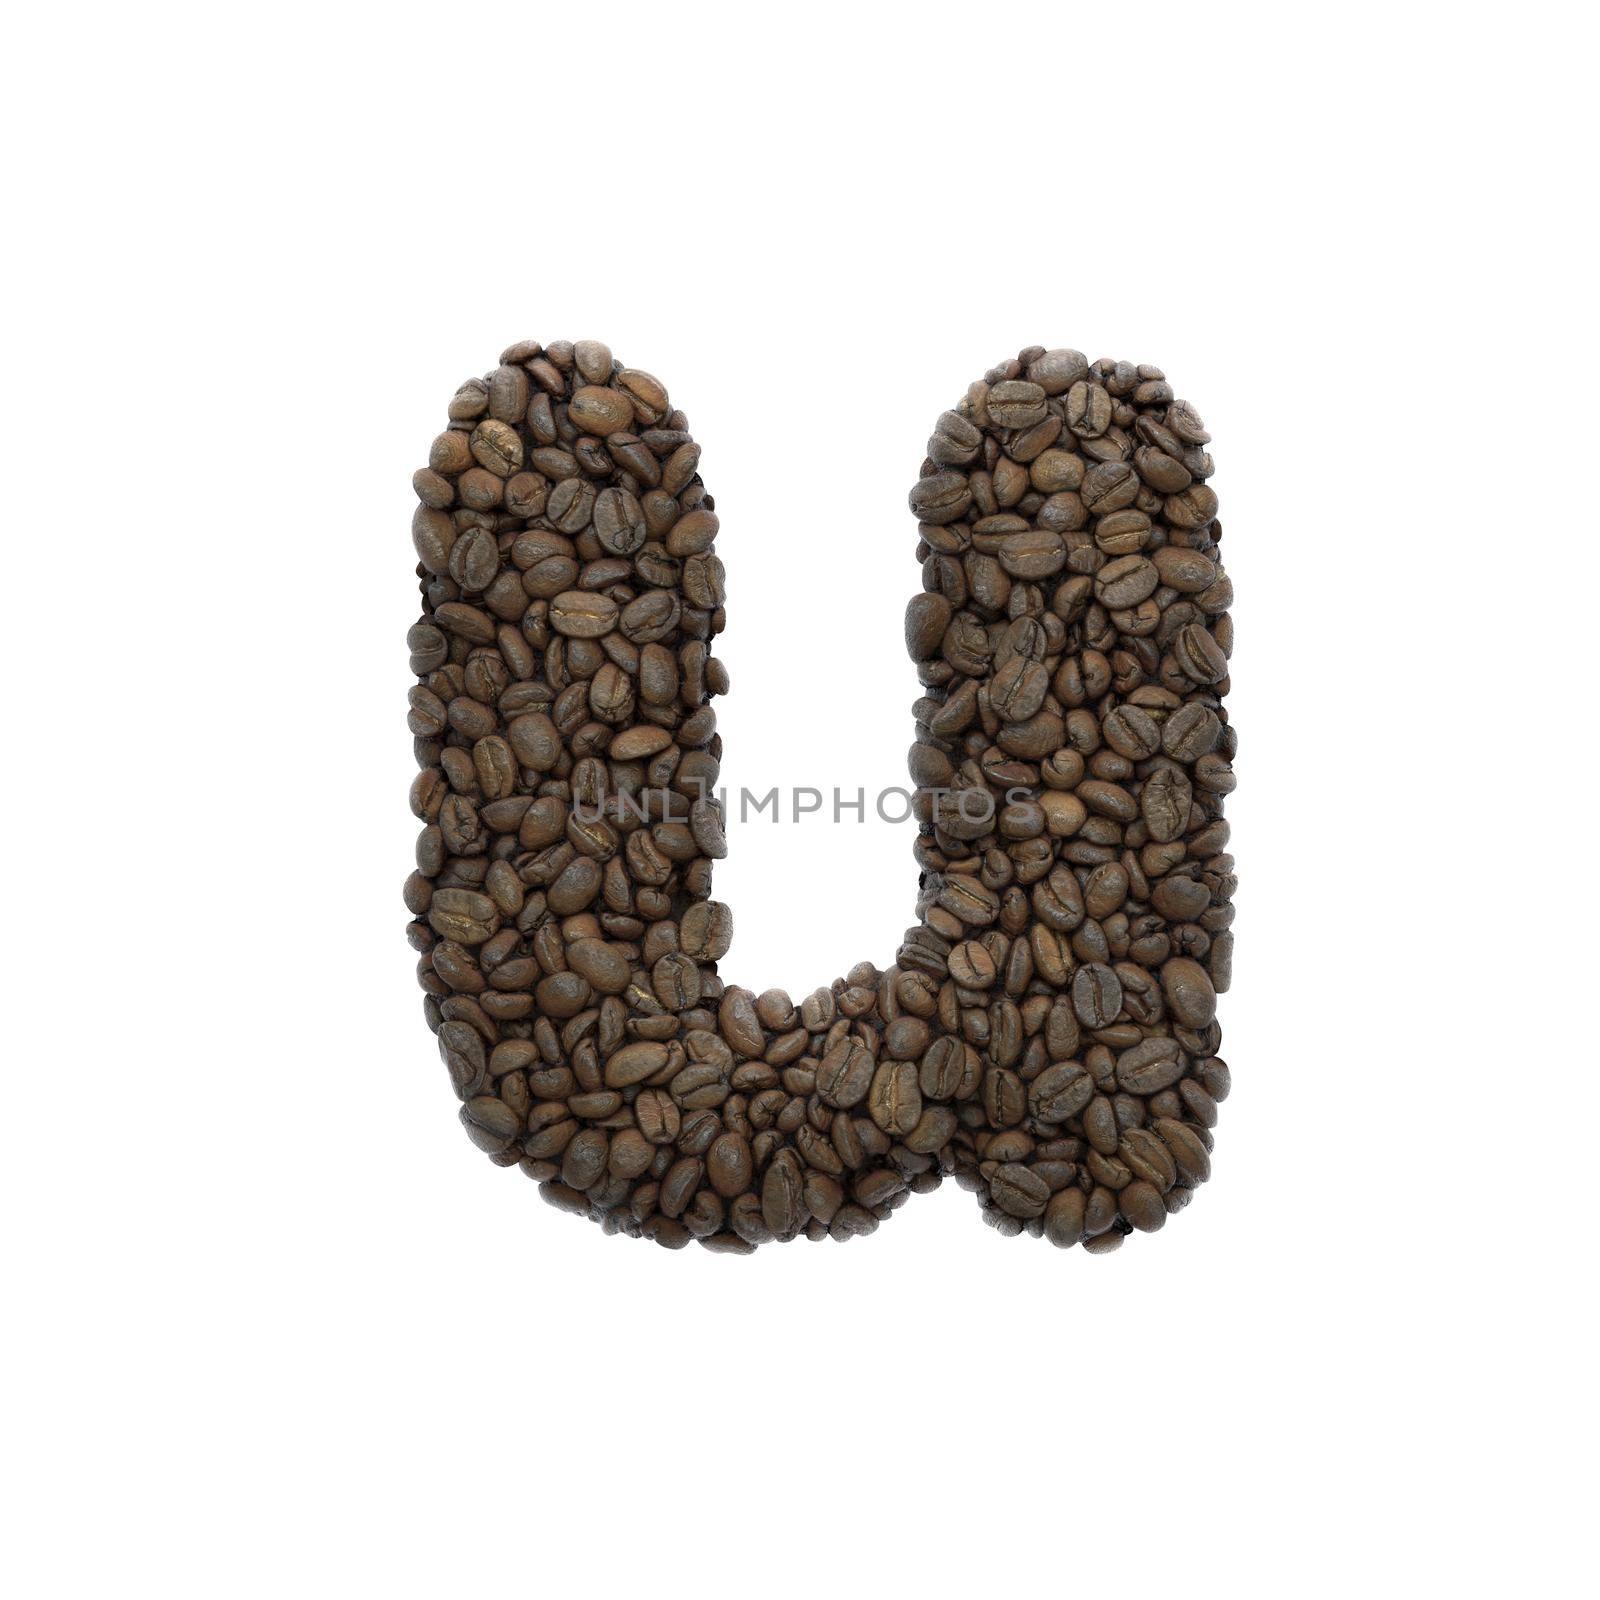 Coffee letter U - Small 3d roasted beans font isolated on white background. This alphabet is perfect for creative illustrations related but not limited to Coffee, energy, insomnia...